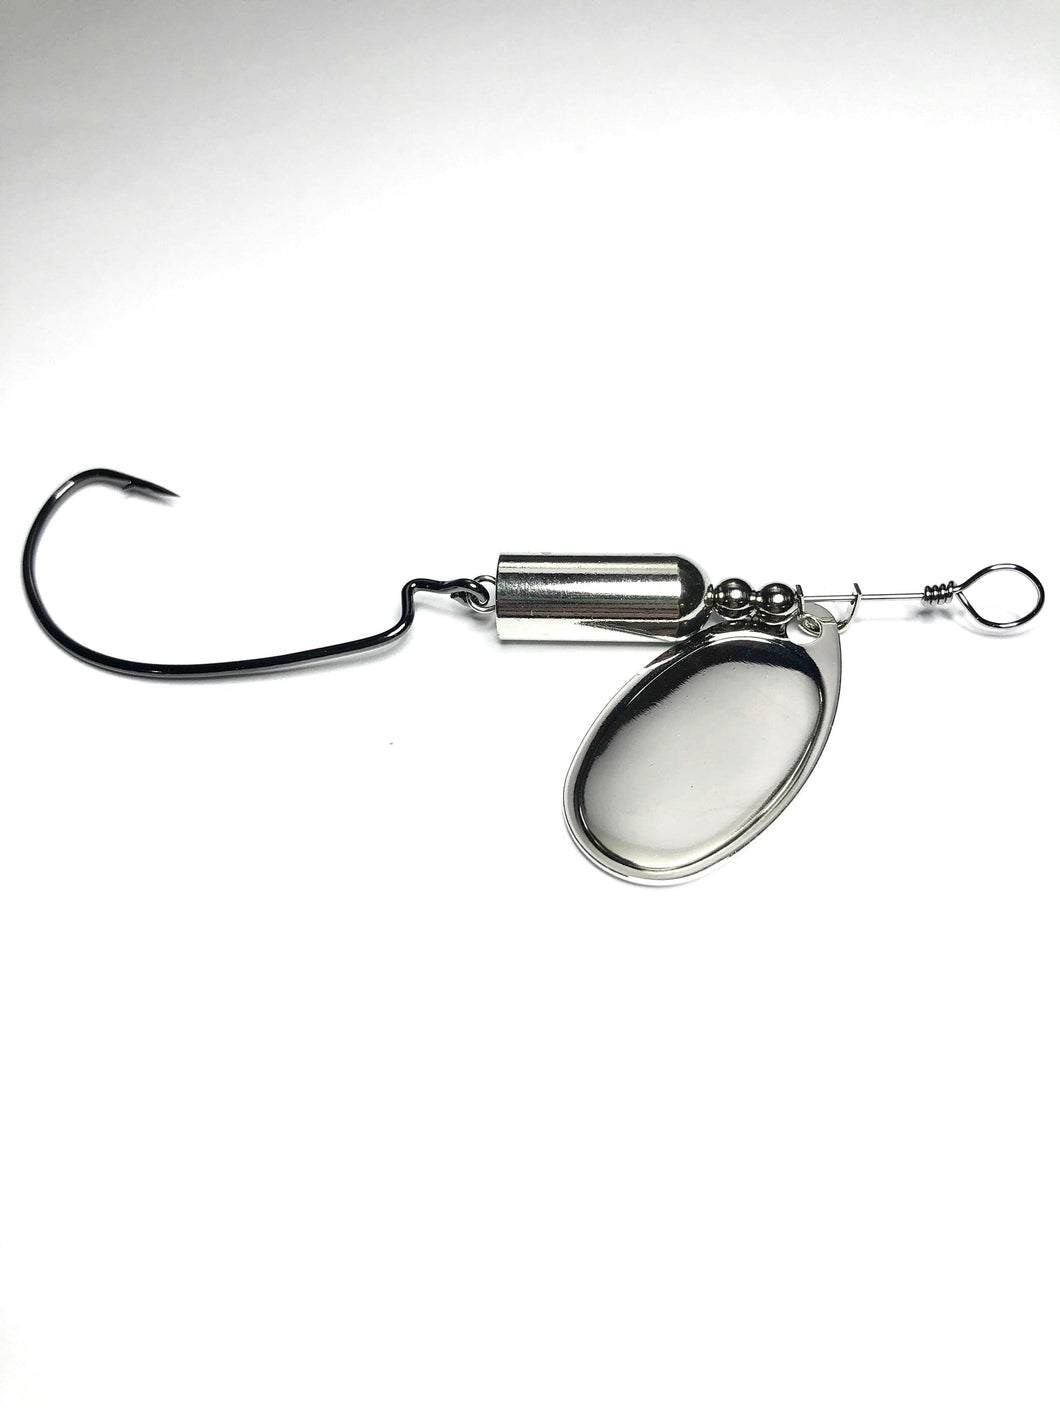 Nickel Spinner Swimmer (Dangle Lures Cole). The 'finesse' spinnerbait, great for catching BIG fish!